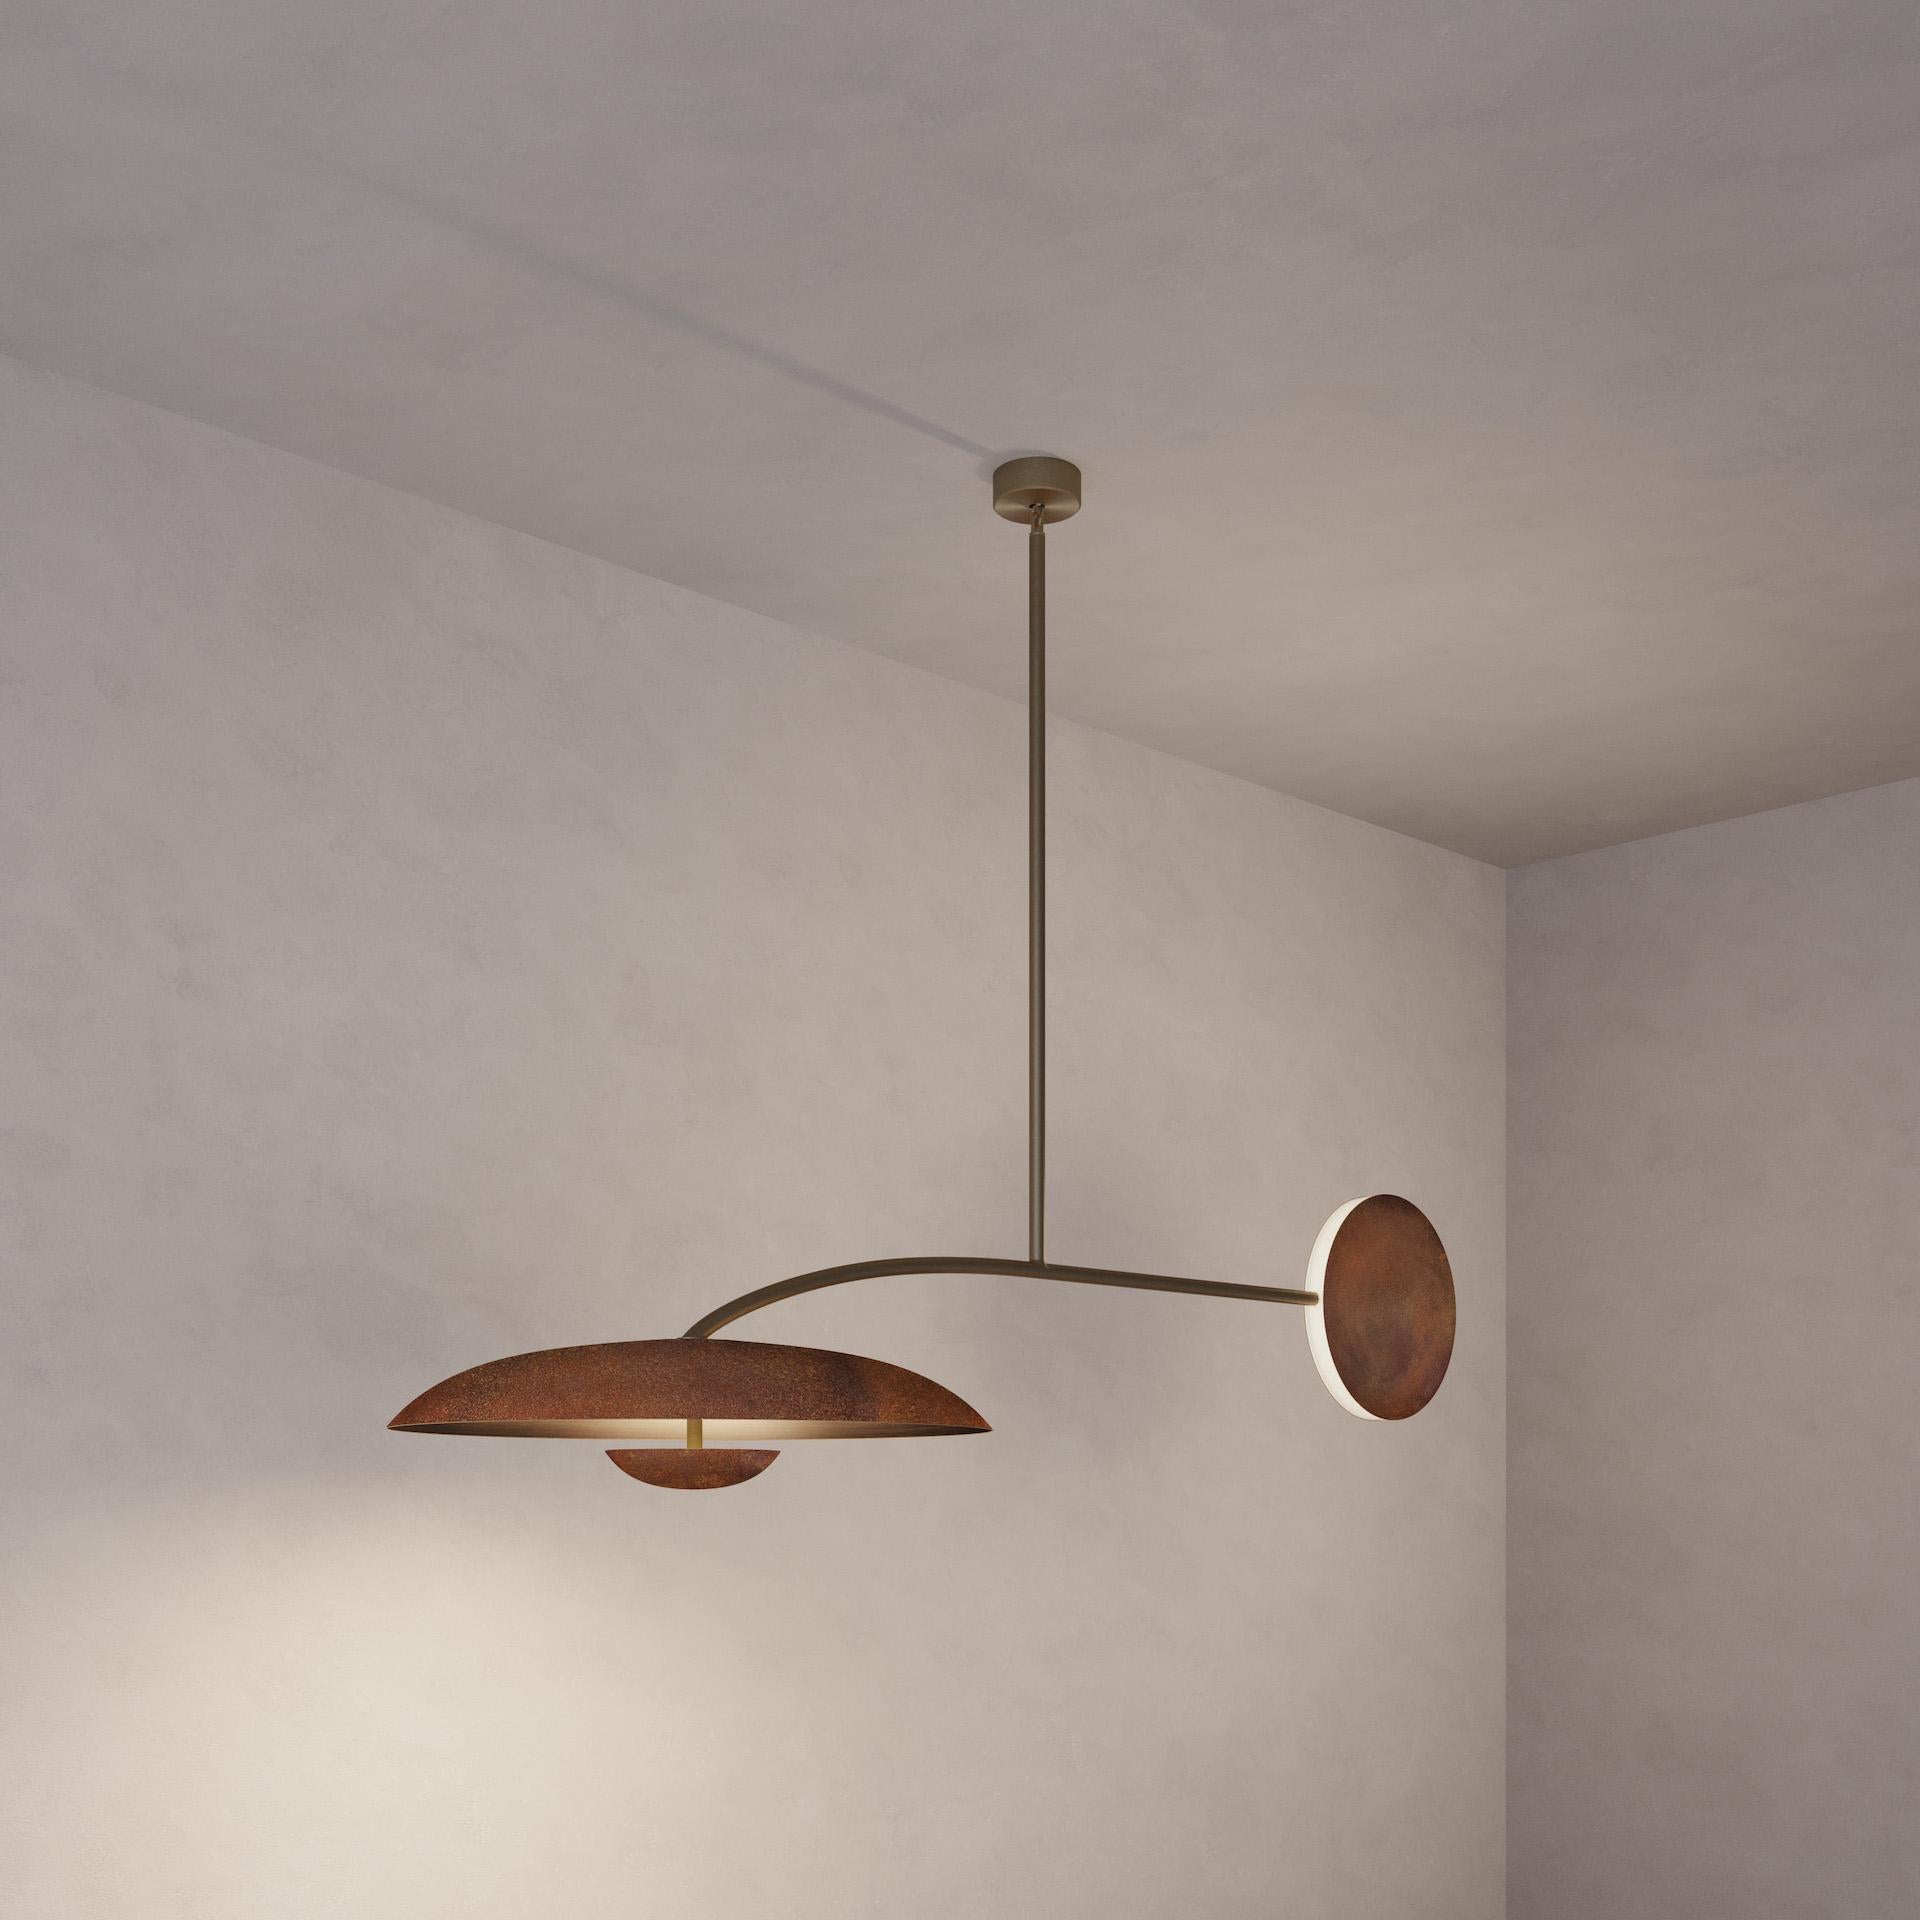 English Orbit Solo Rust Ceiling Light by Atelier001